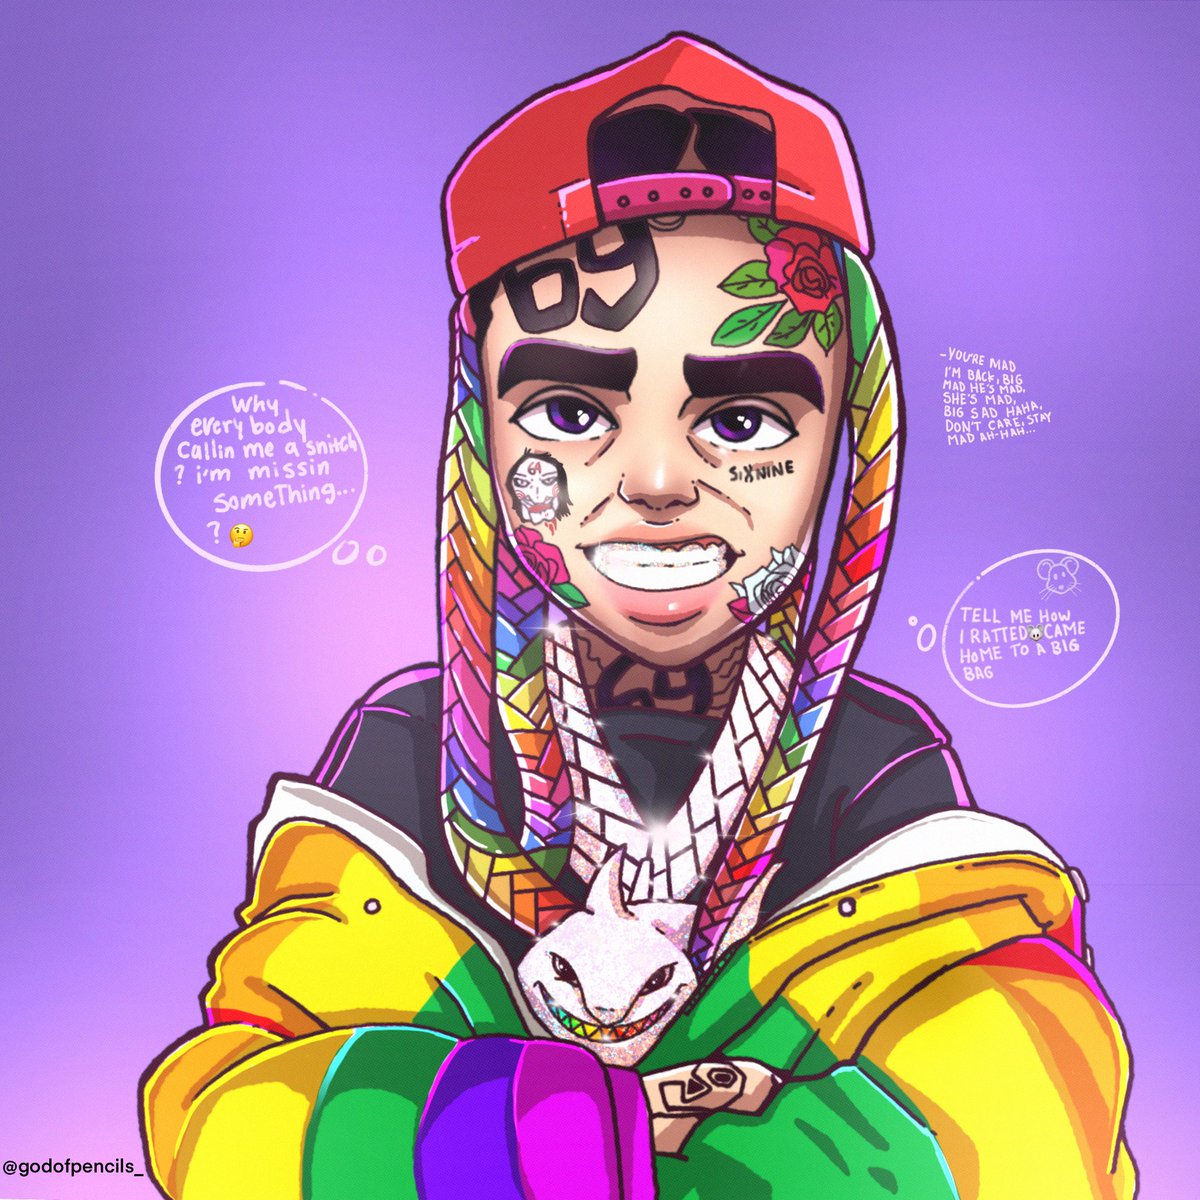 Godofpencils On Twitter Gooba Is Number One Song On The Billboard We Really Thought 6ix9ine Career Was Over After Snitchin Then The Came Home And Got A Bag This - 6ix9ine gooba roblox id code